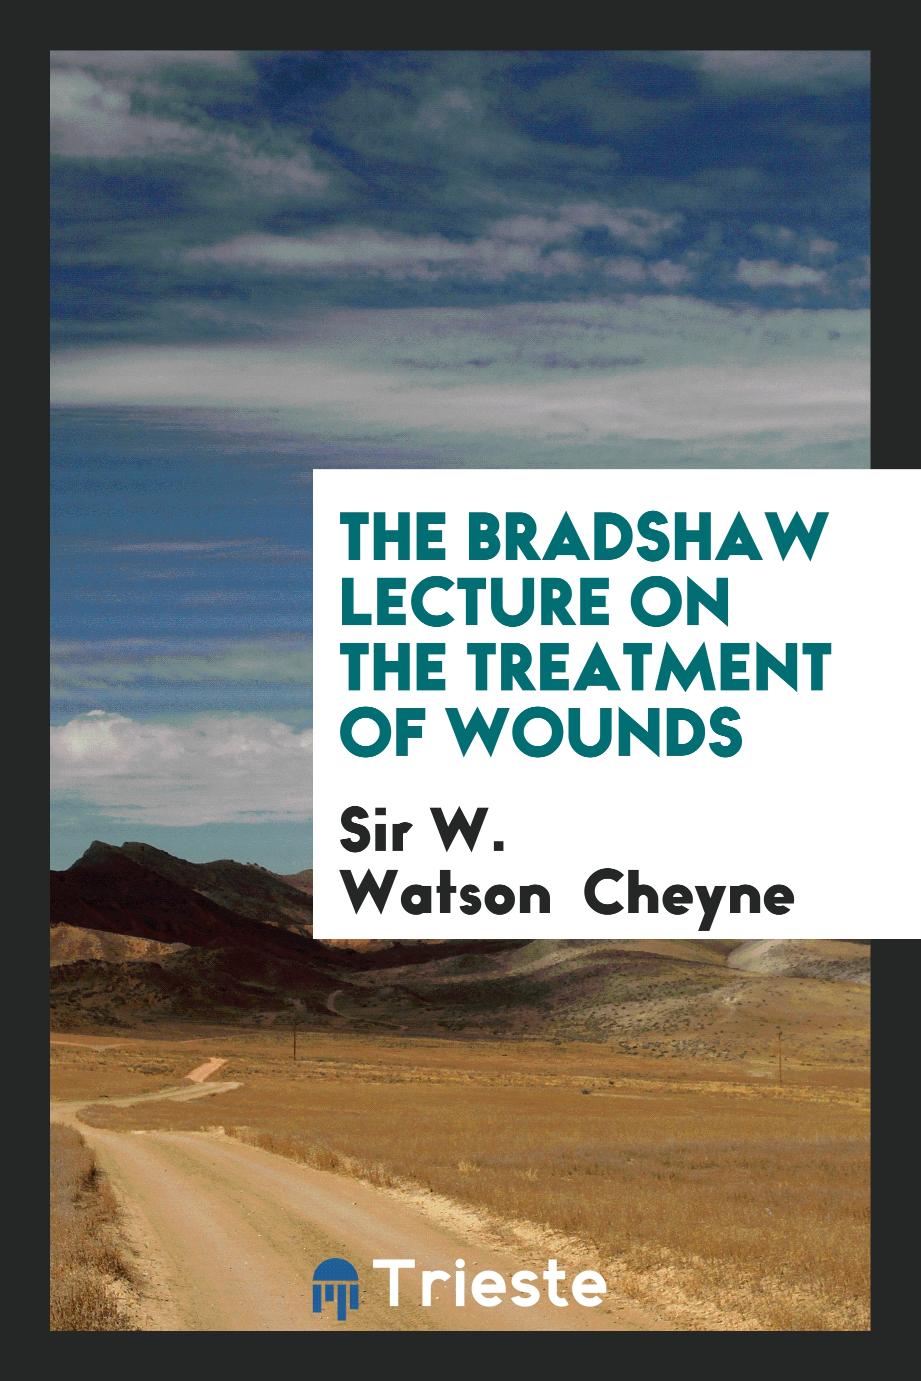 The Bradshaw lecture on the treatment of wounds